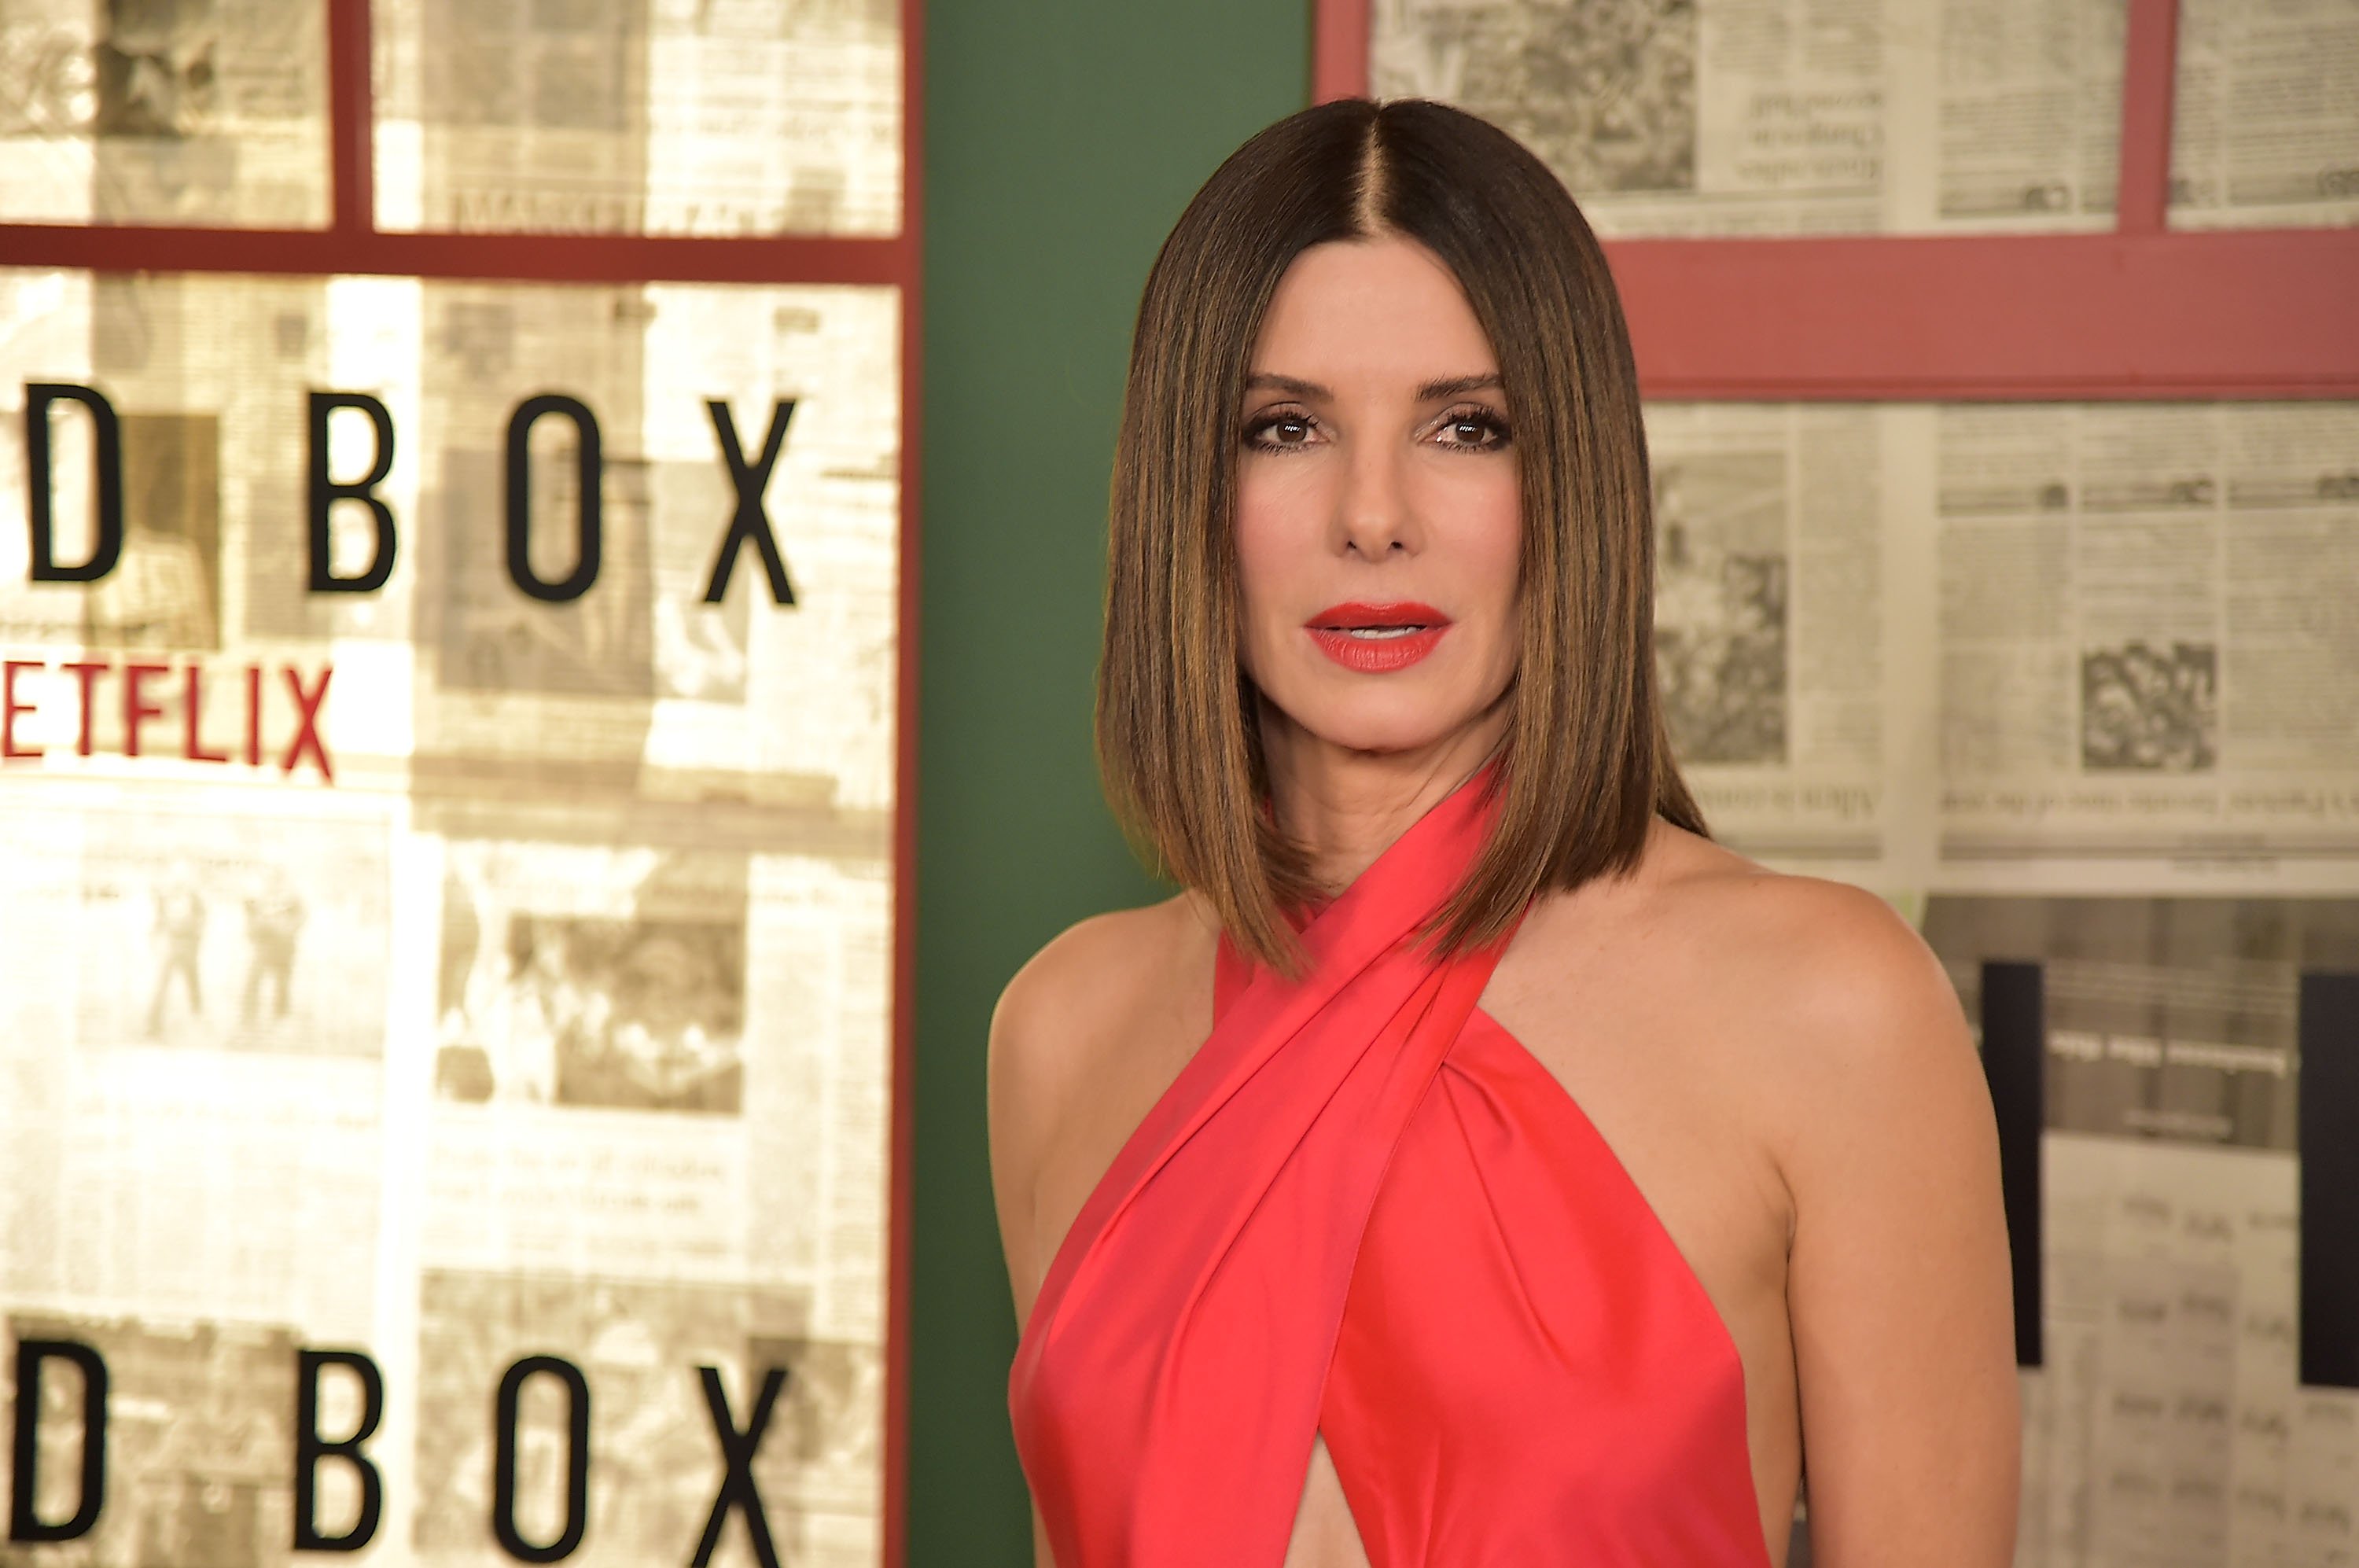 Sandra Bullock at the premiere of "Bird Box" on December 17, 2018 | Source: Getty Images